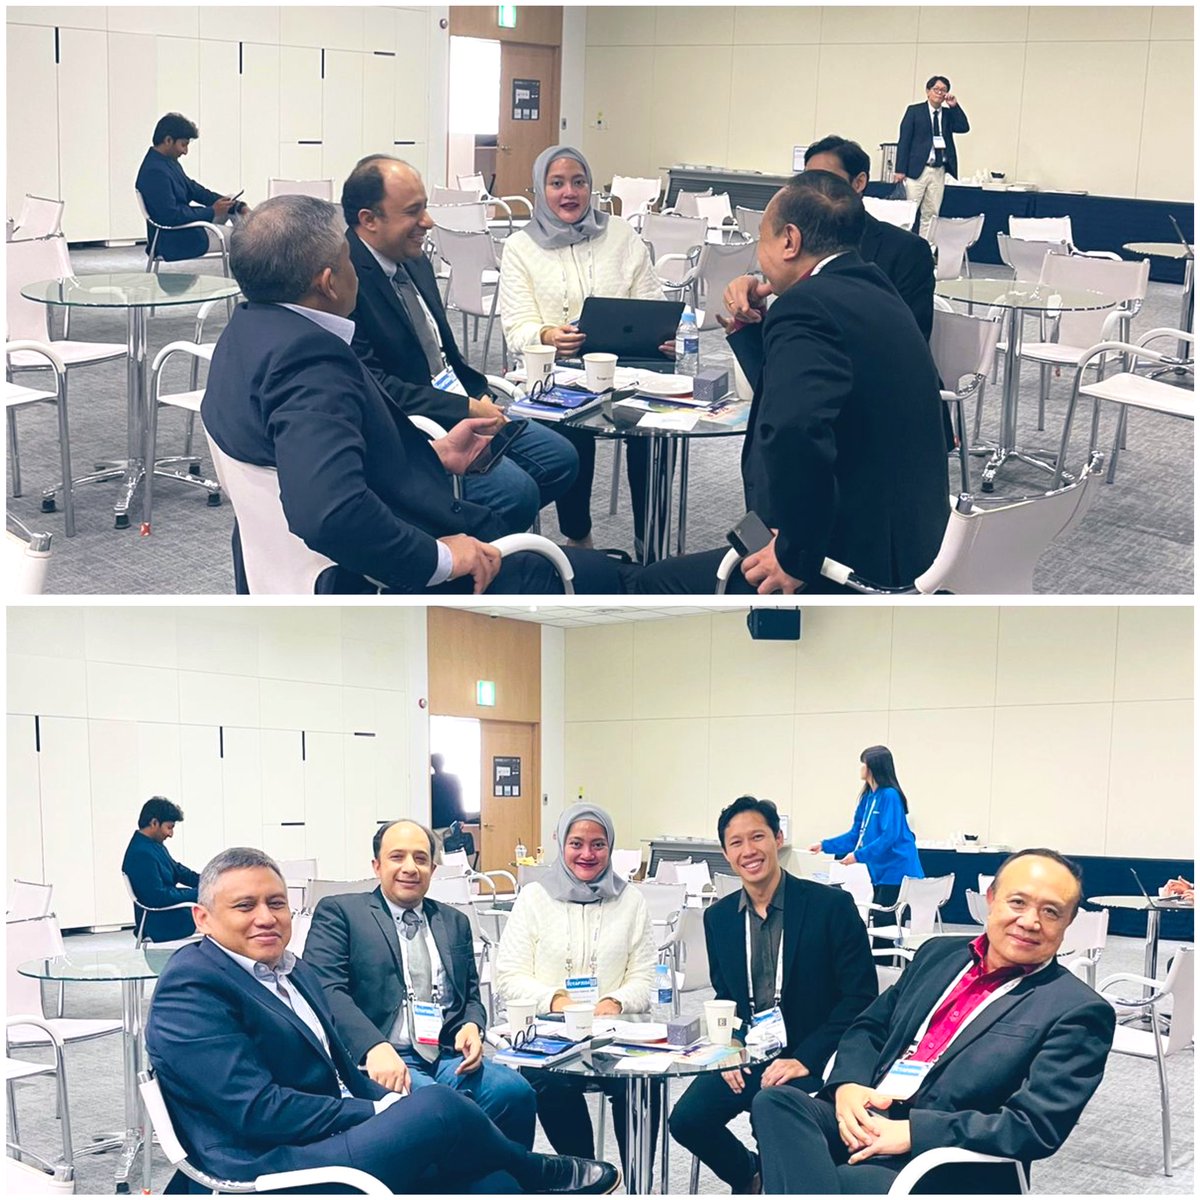 Exciting things are brewing for #ISICAM2024.. We’re working hard to create an extraordinary scientific session. Stay tuned for updates—it’s going to be fantastic! @uziyahya46 @IndahSP_MD @aninkasaboe